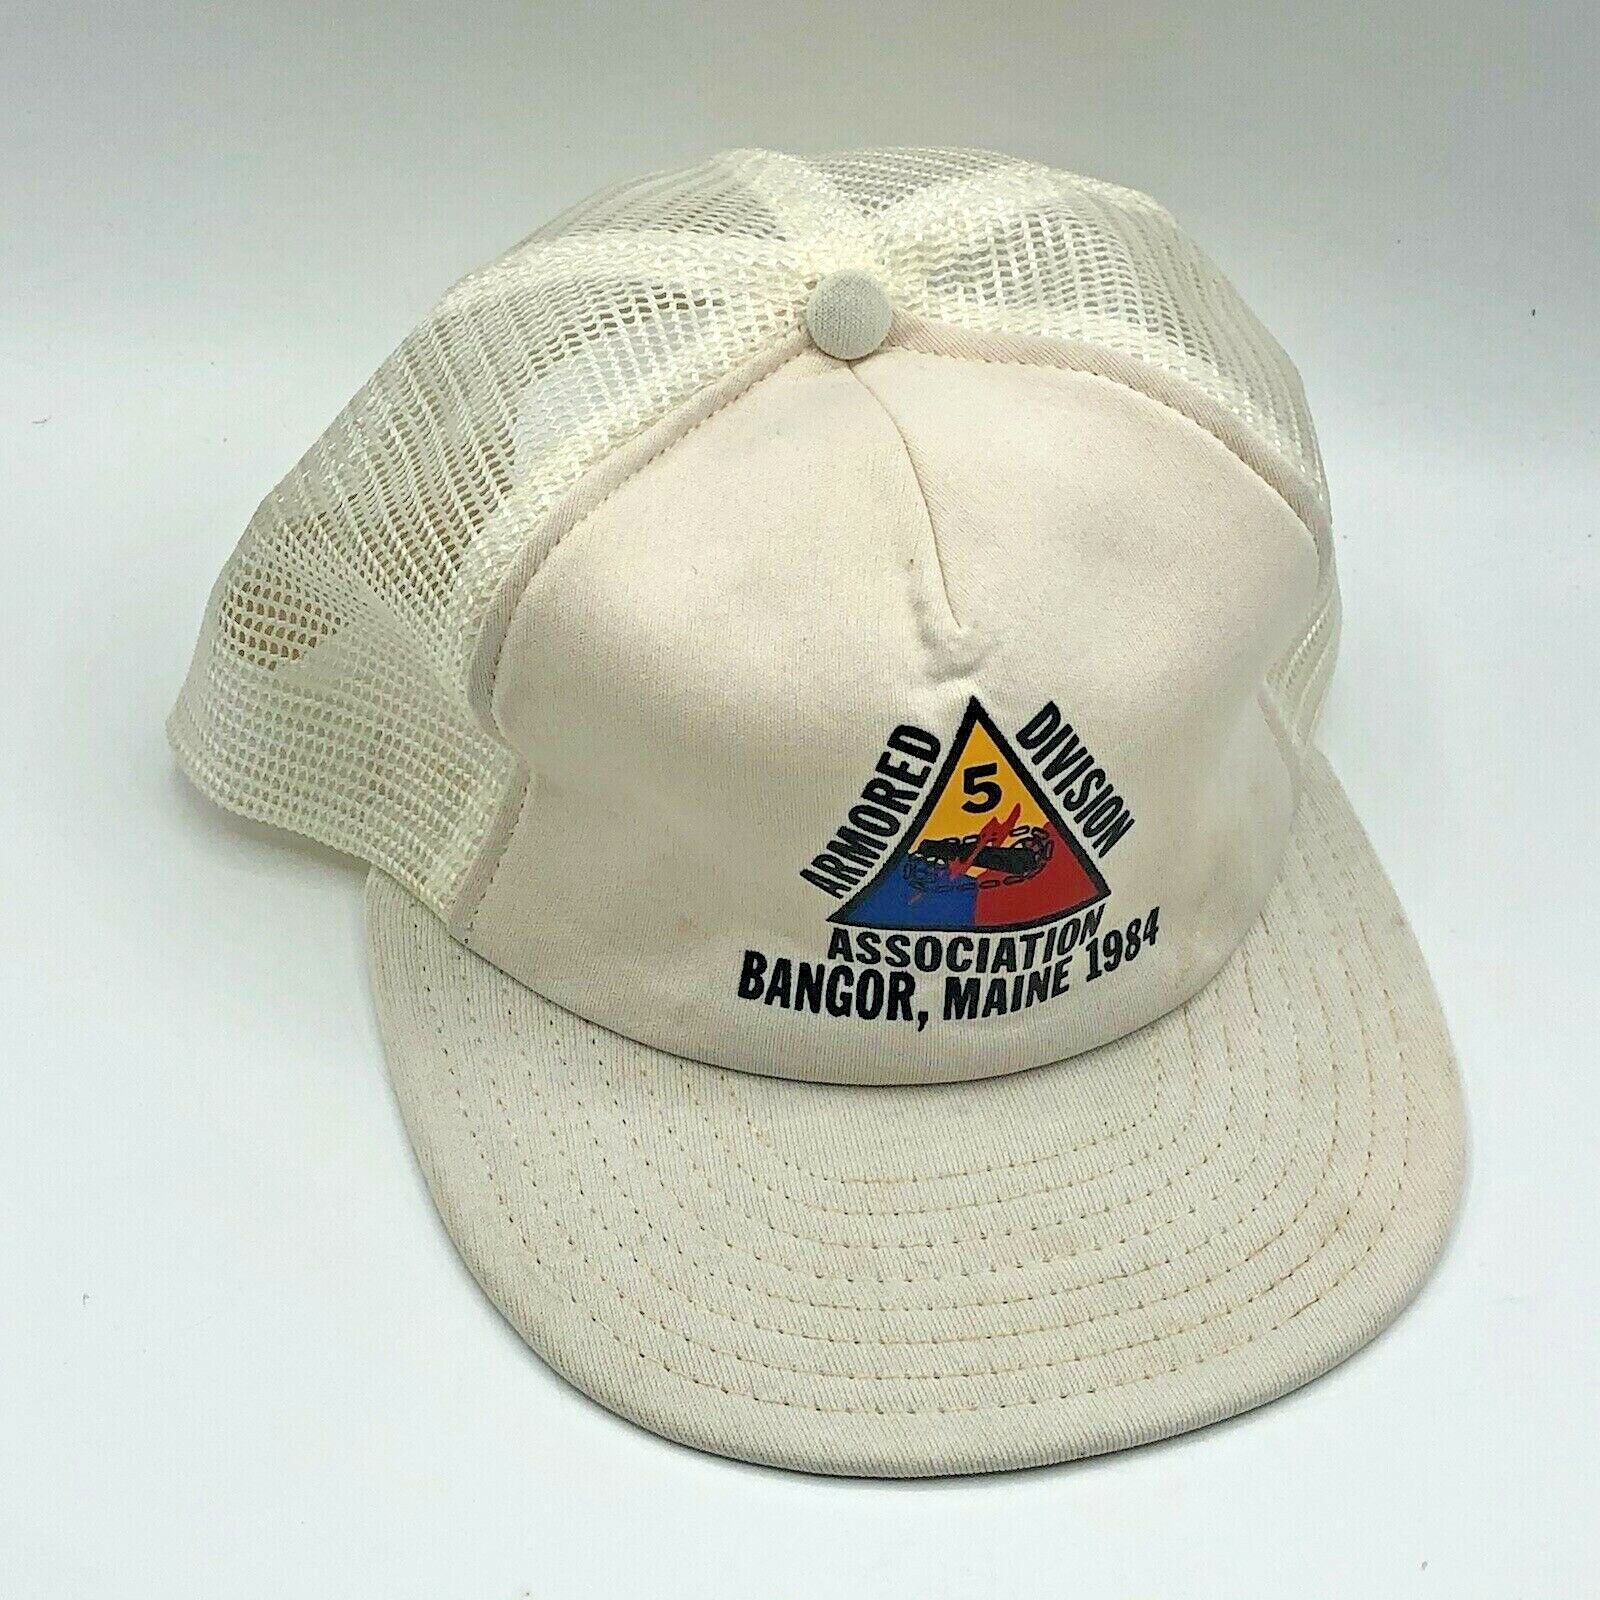 WWII US Army 5th Armored Corps Association Bangor Maine Reunion 1984 White Hat